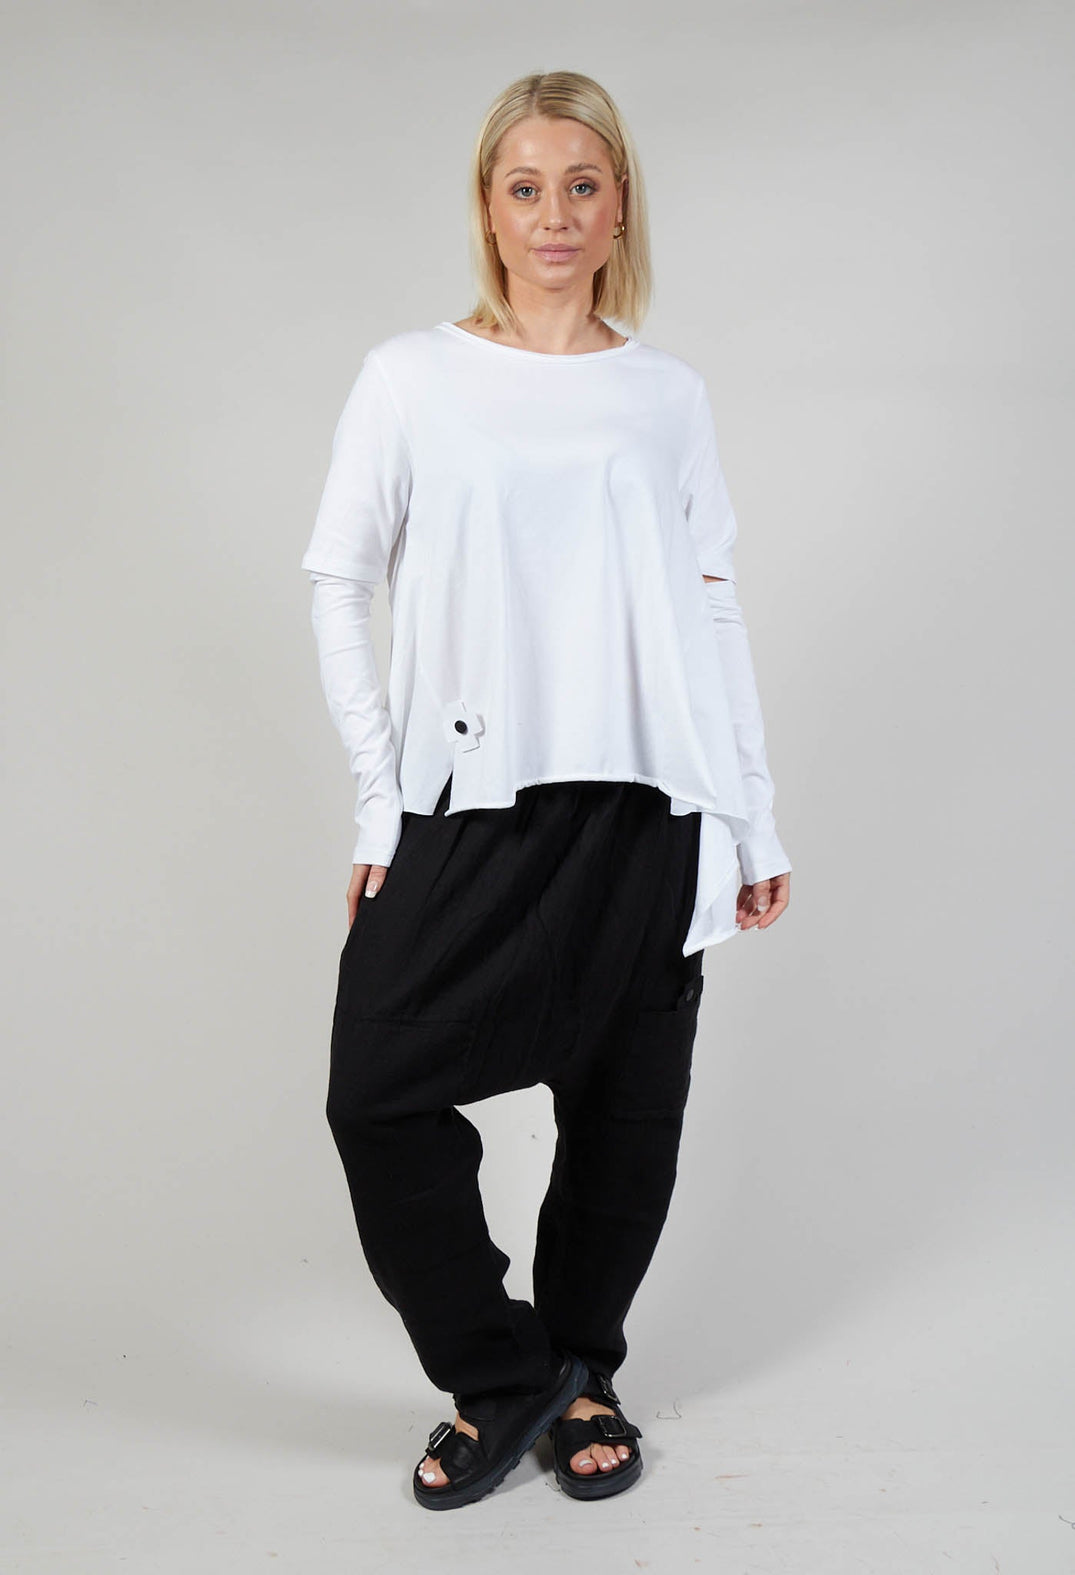 Detached Sleeve T-shirt in White